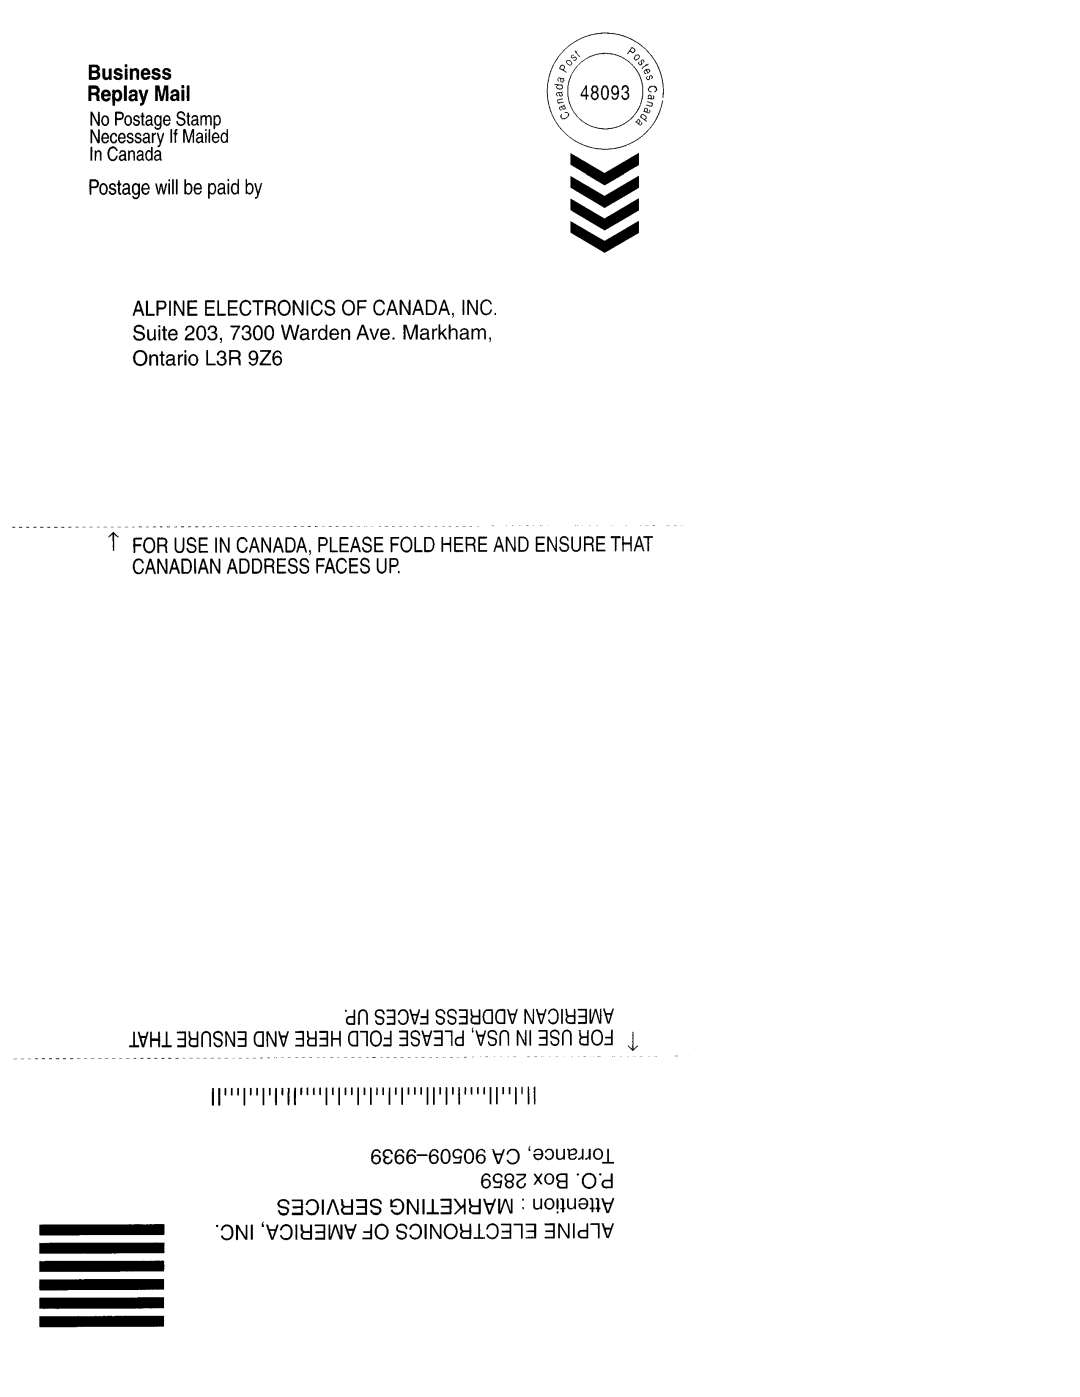 Alpine MRD-M300, MRD-M500 Business Replay Mail, Postagewill be paid by, Alpine Electronics Of Canada, Inc, Ontario L3R 9Z6 